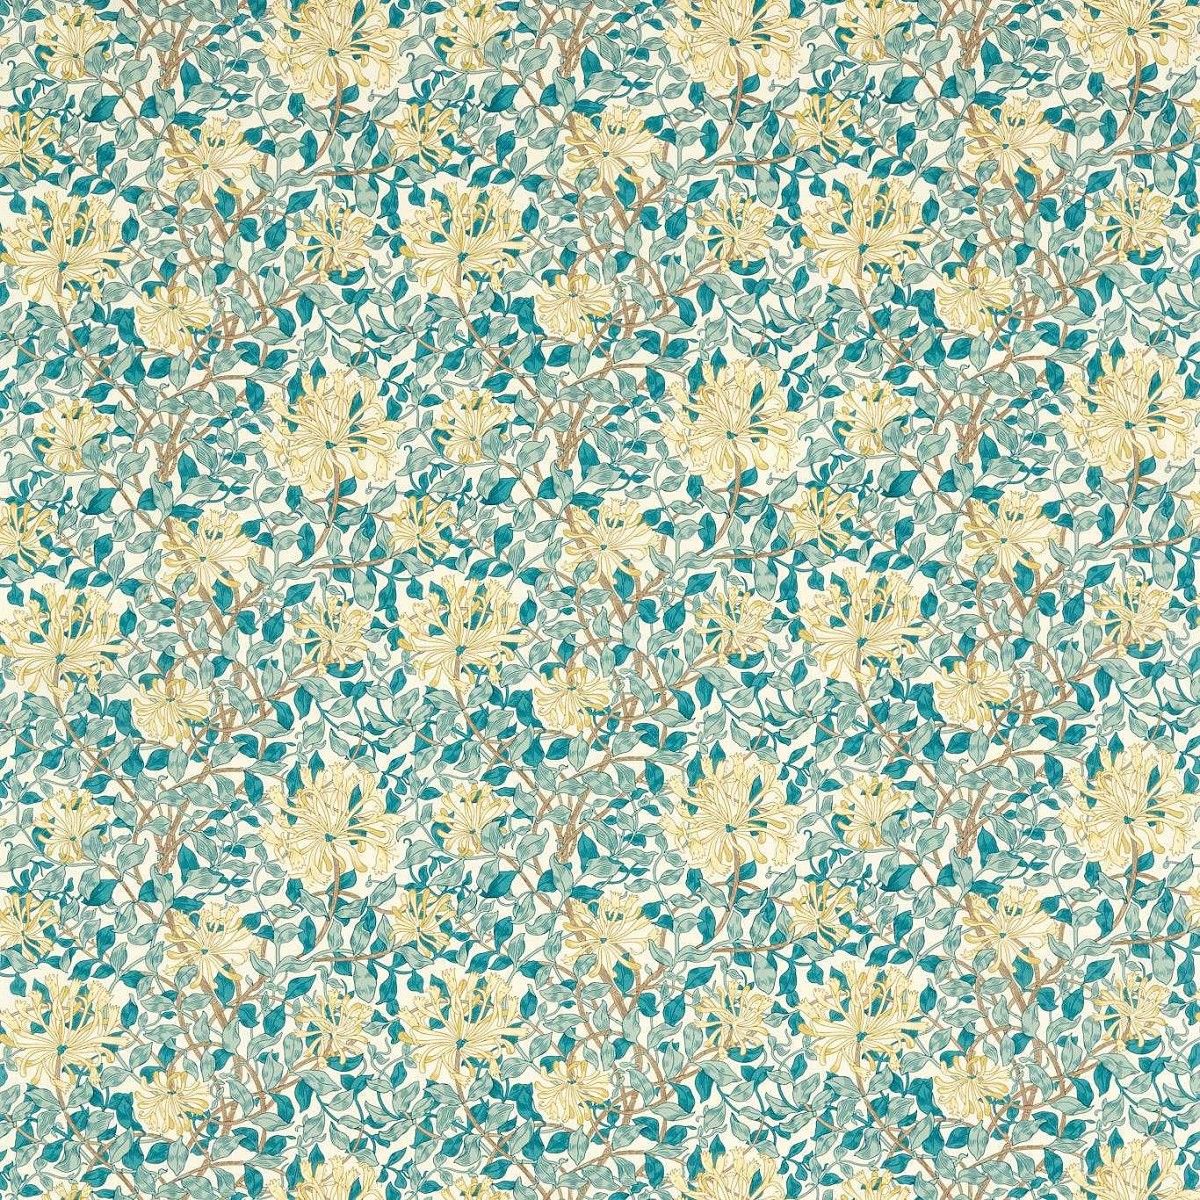 Honeysuckle Outdoor Teal/Soft Lemon Fabric by William Morris & Co.